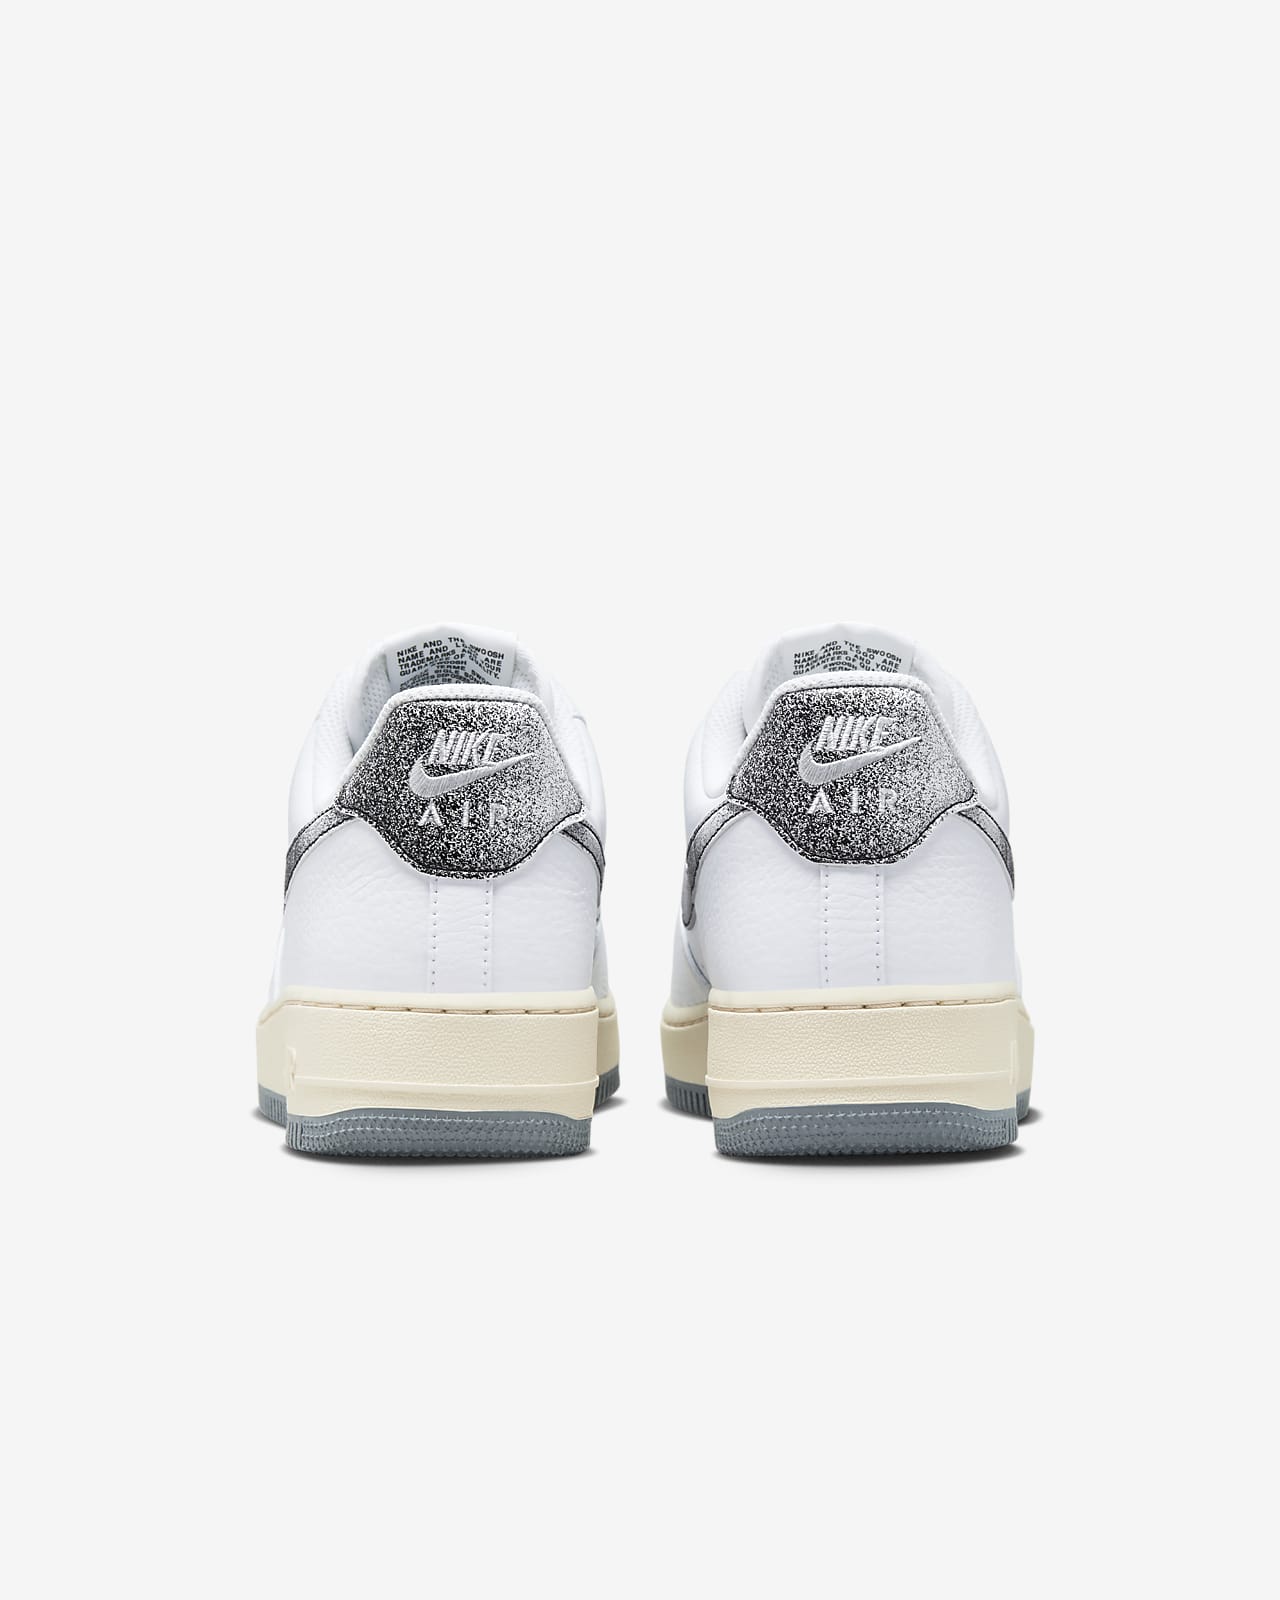 Nike Air Force 1 '07 Men's Shoes. Nike IN